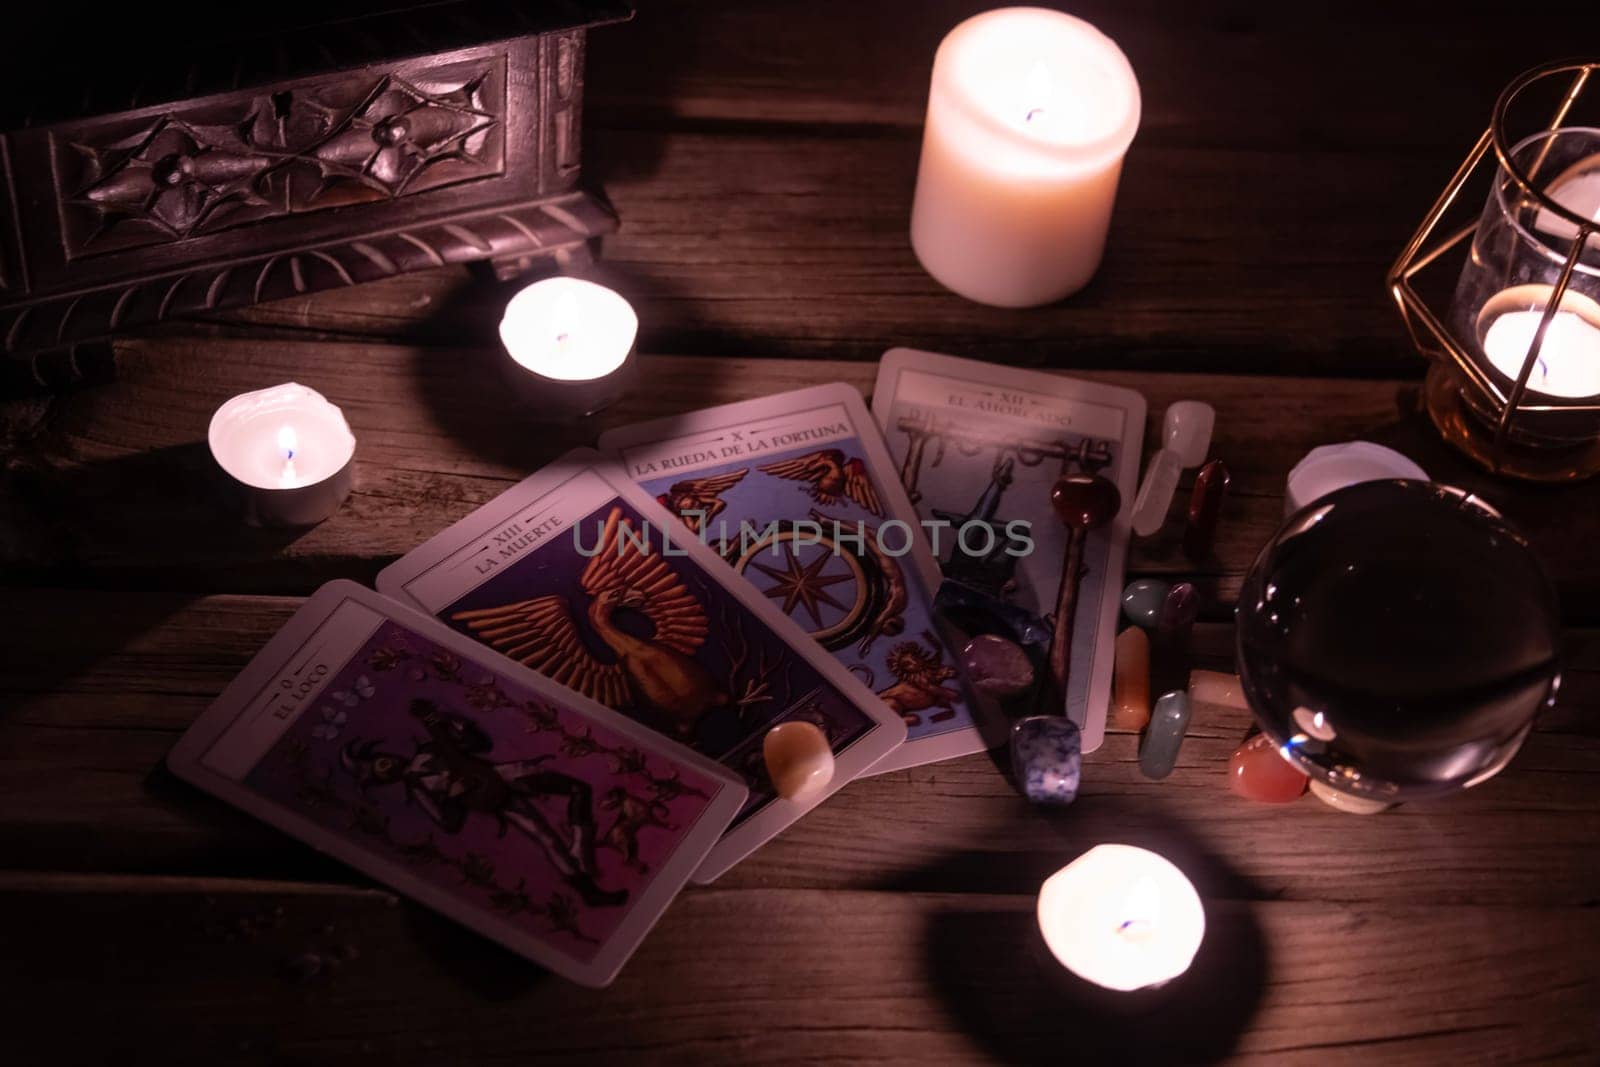 Tarot cards including The Fool and The Lovers alongside crystals and candles on a textured wooden table